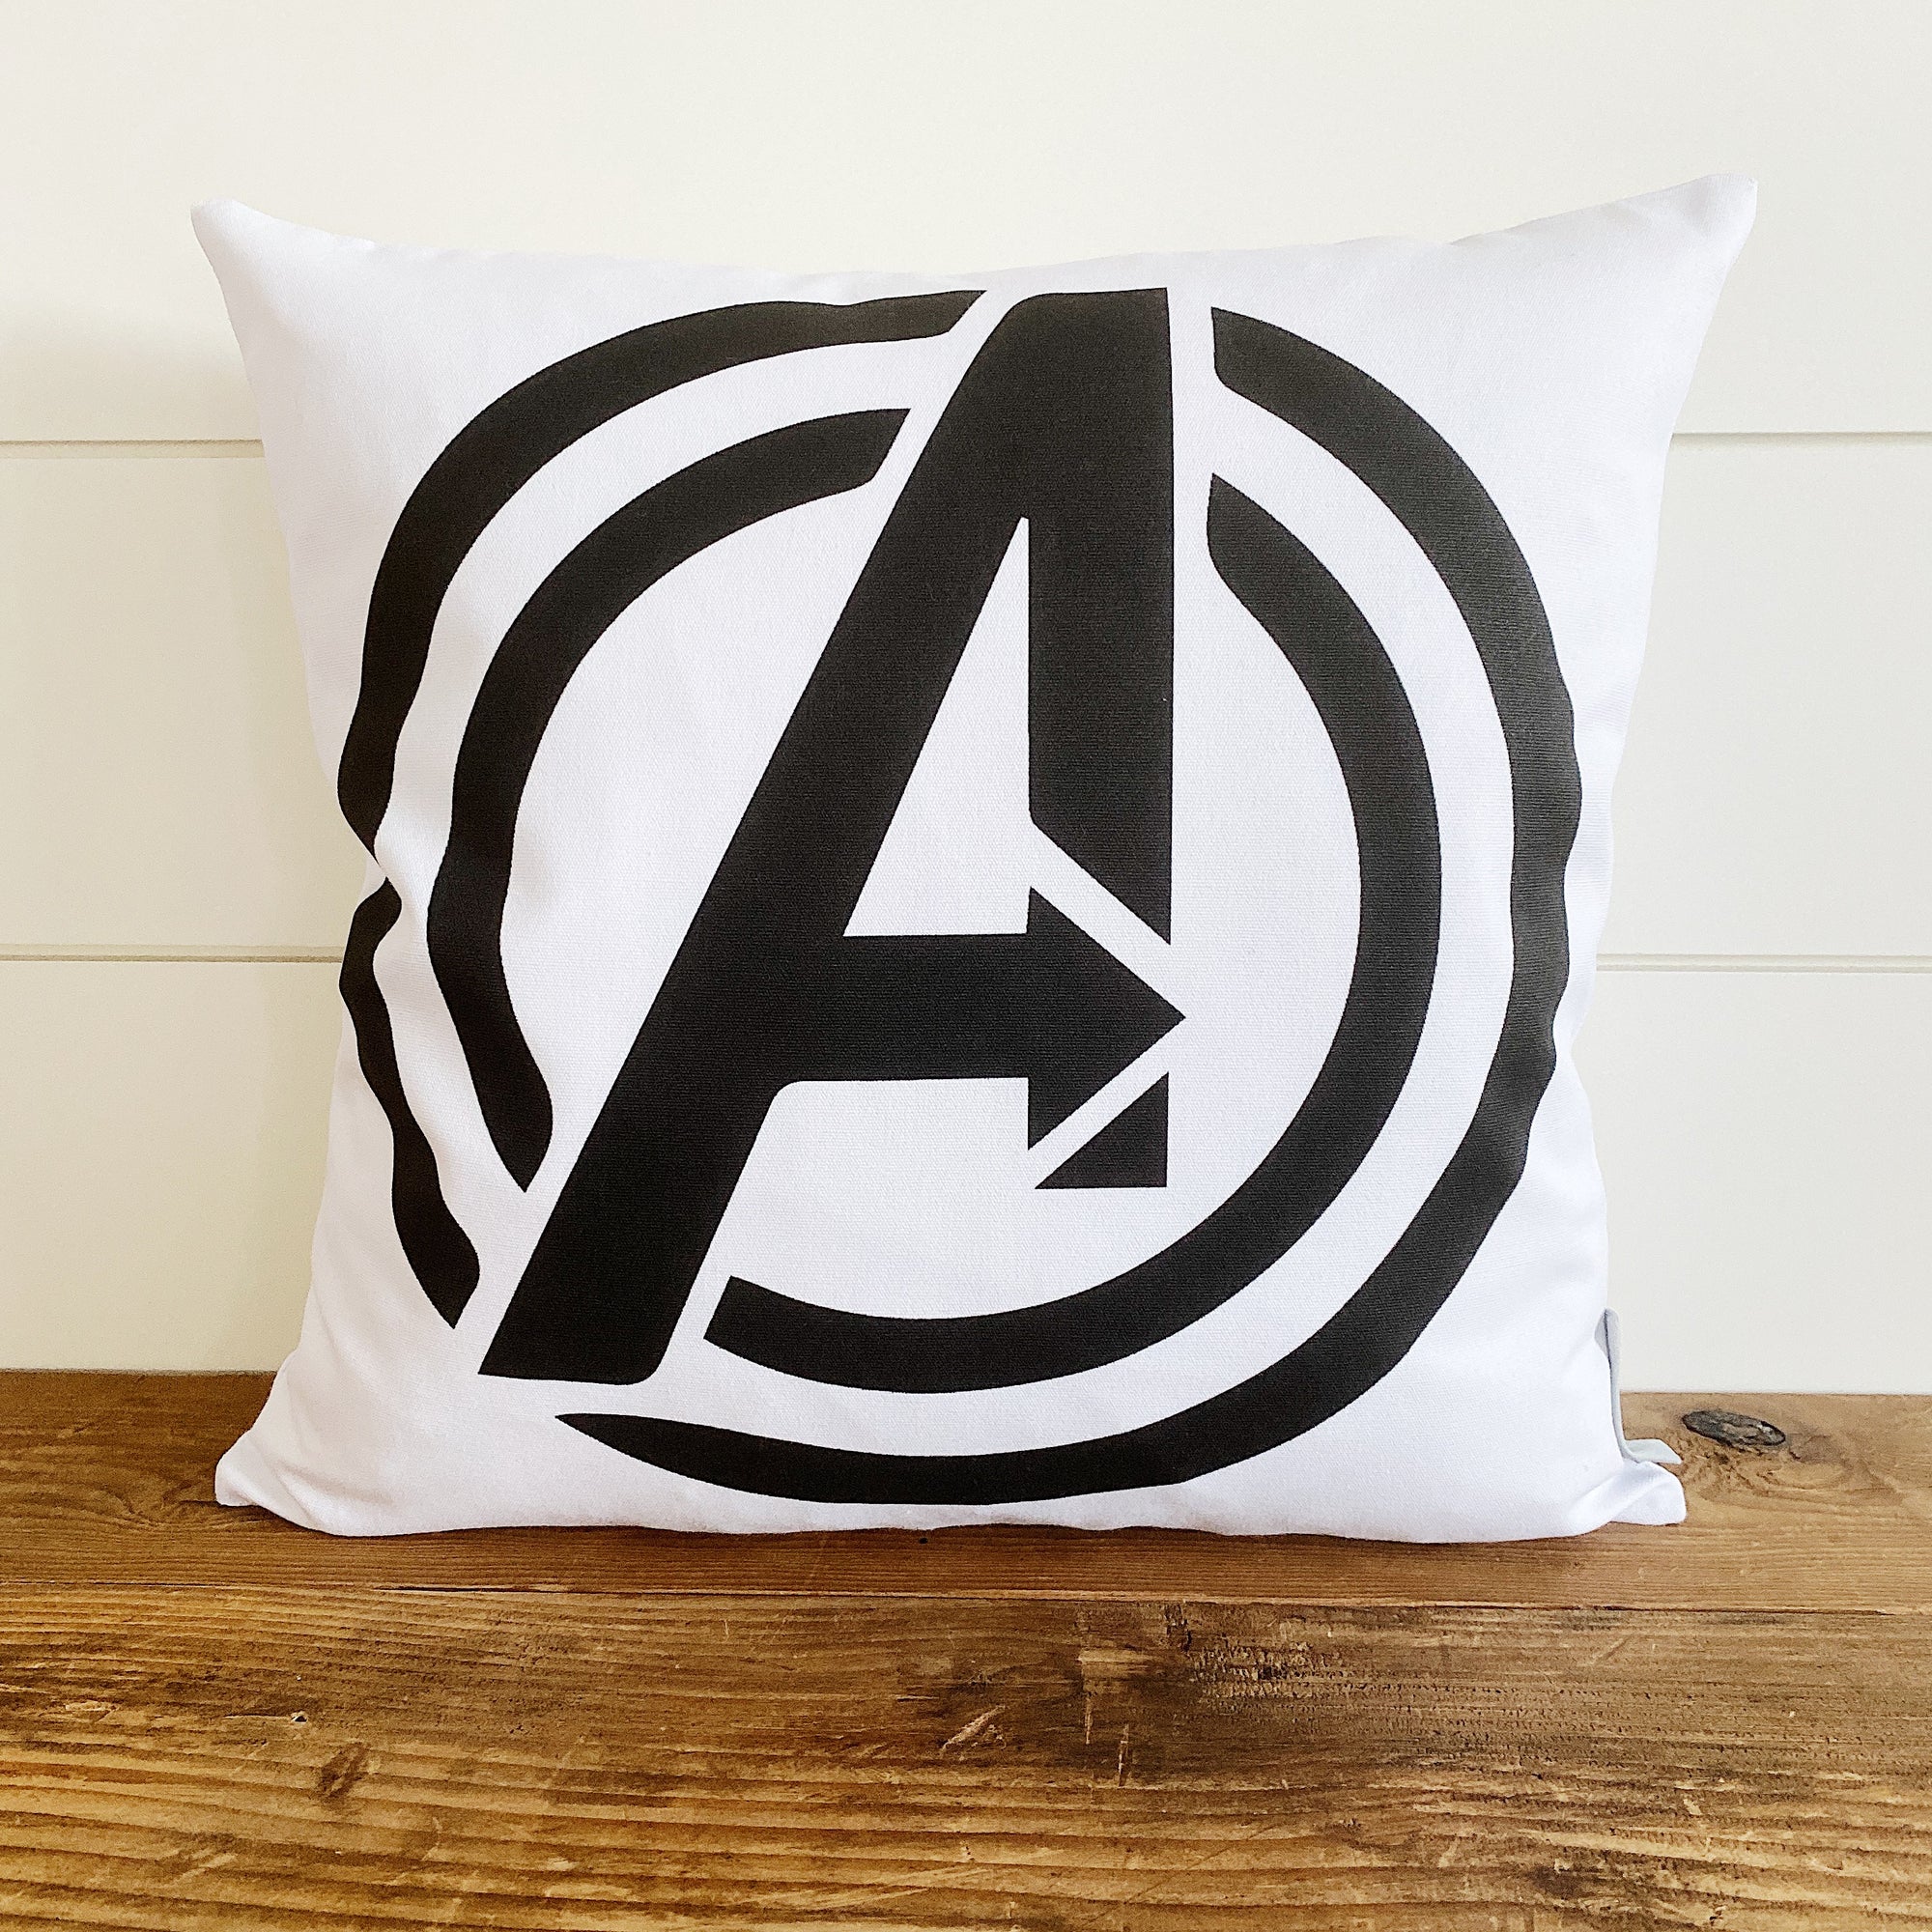 Avengers Pillow Cover - Linen and Ivory